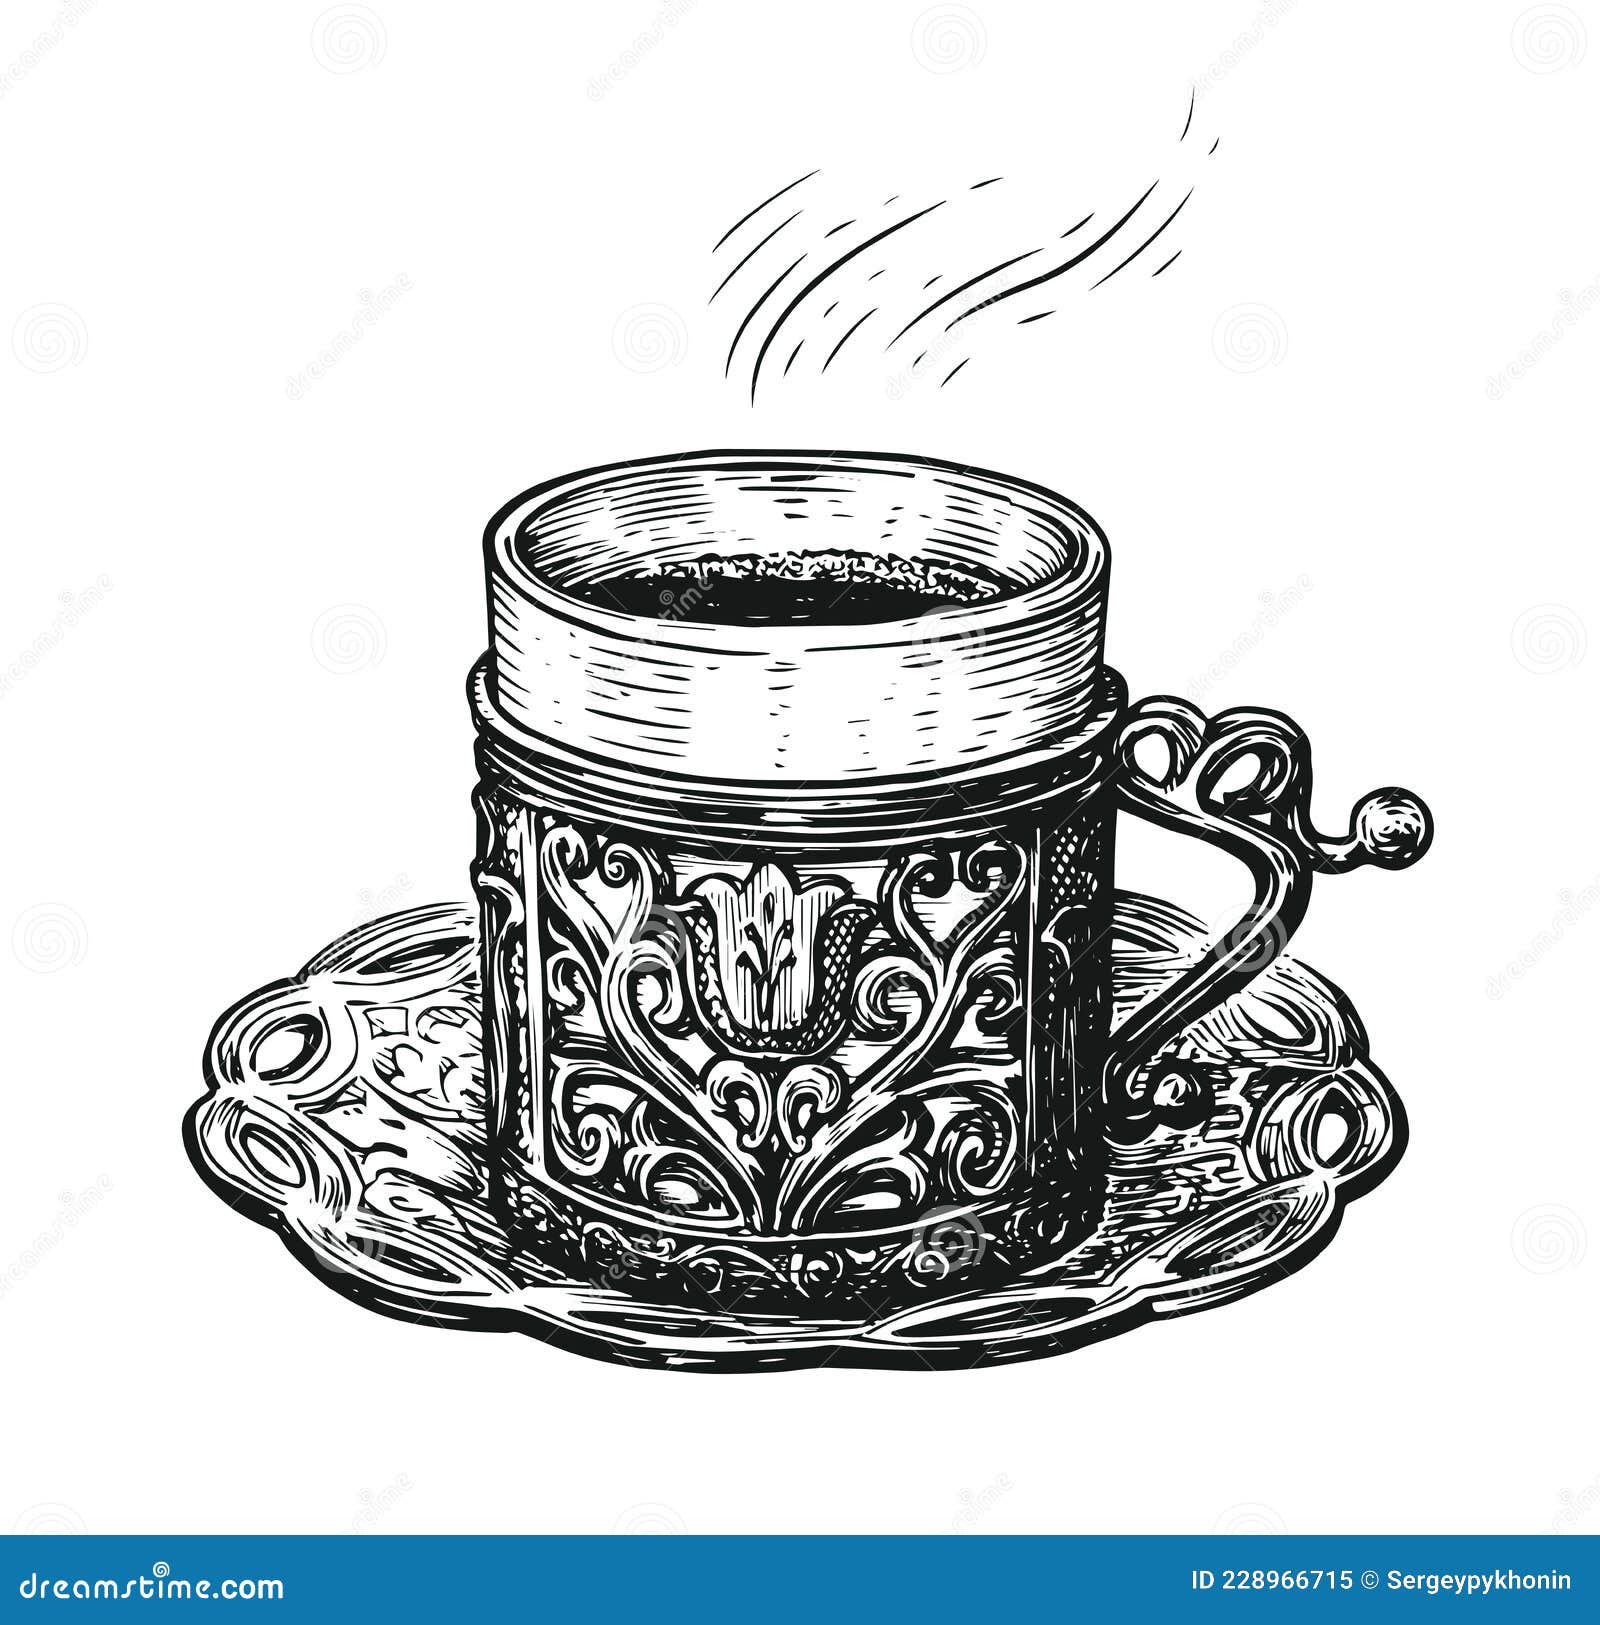 turkish coffee sketch. hand drawn cup on a platter. vintage  